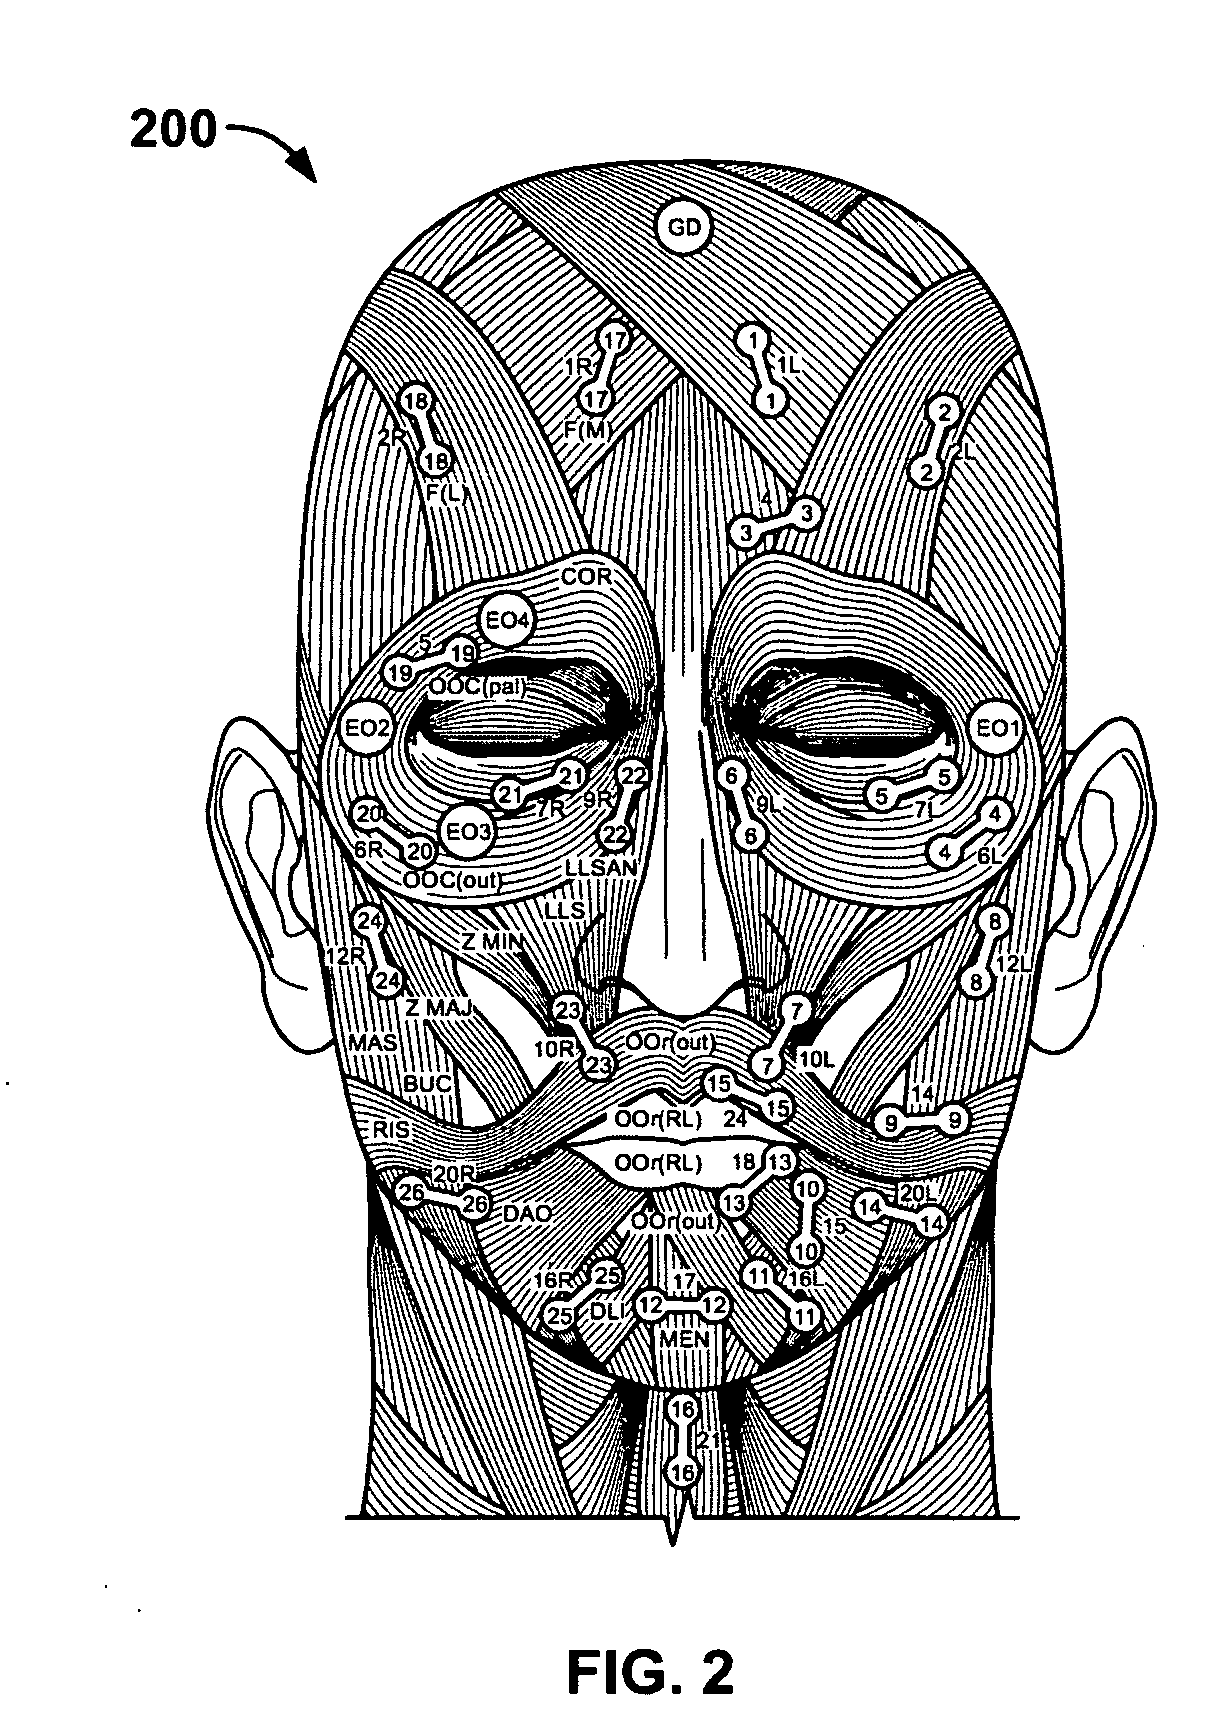 System and method for tracking facial muscle and eye motion for computer graphics animation